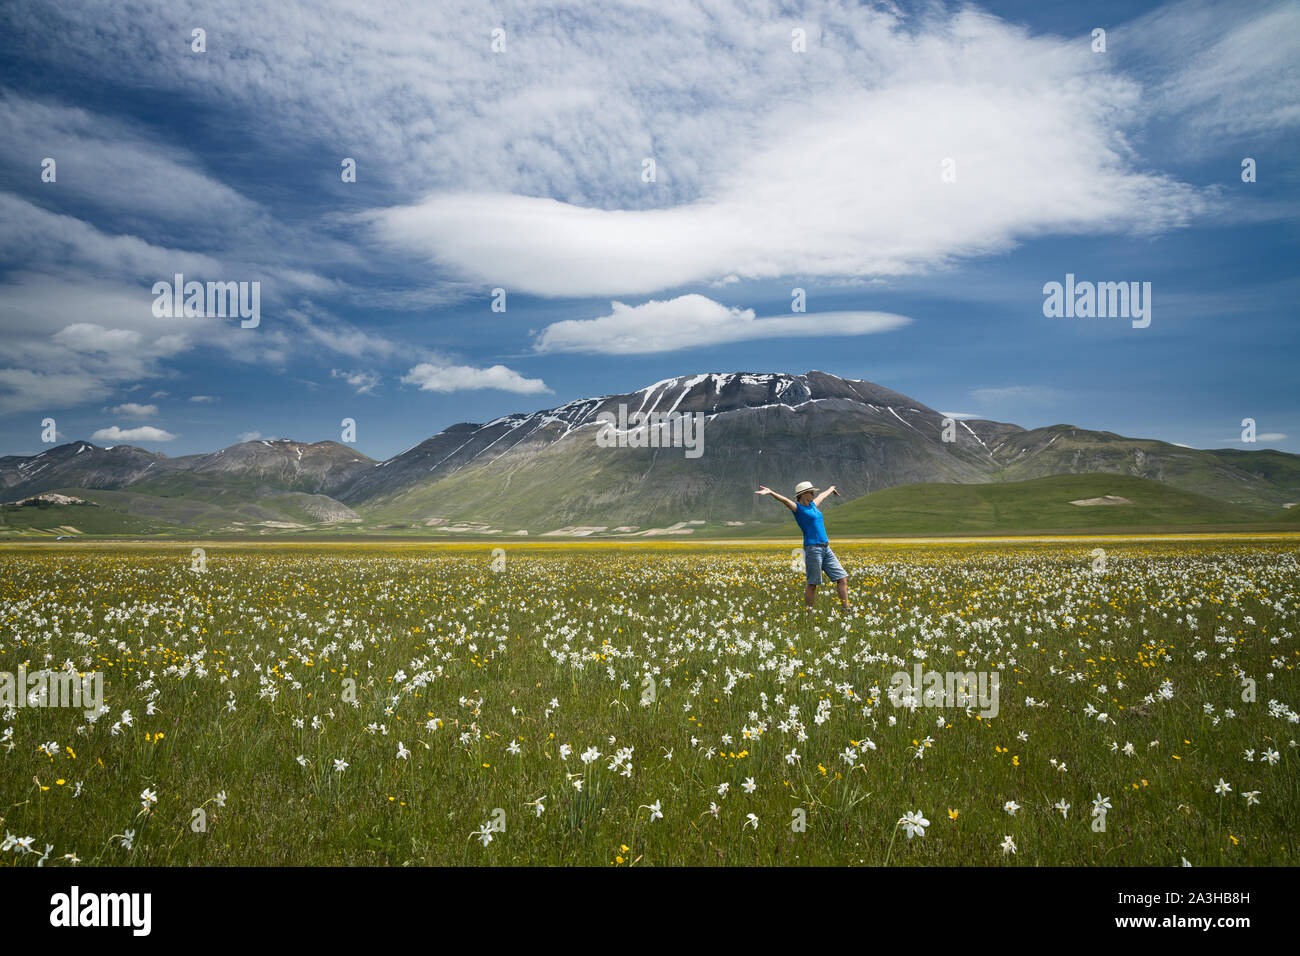 Figure frolicking on the Piano Grande, Monti Sibillini National Park, Umbria, Italy Stock Photo